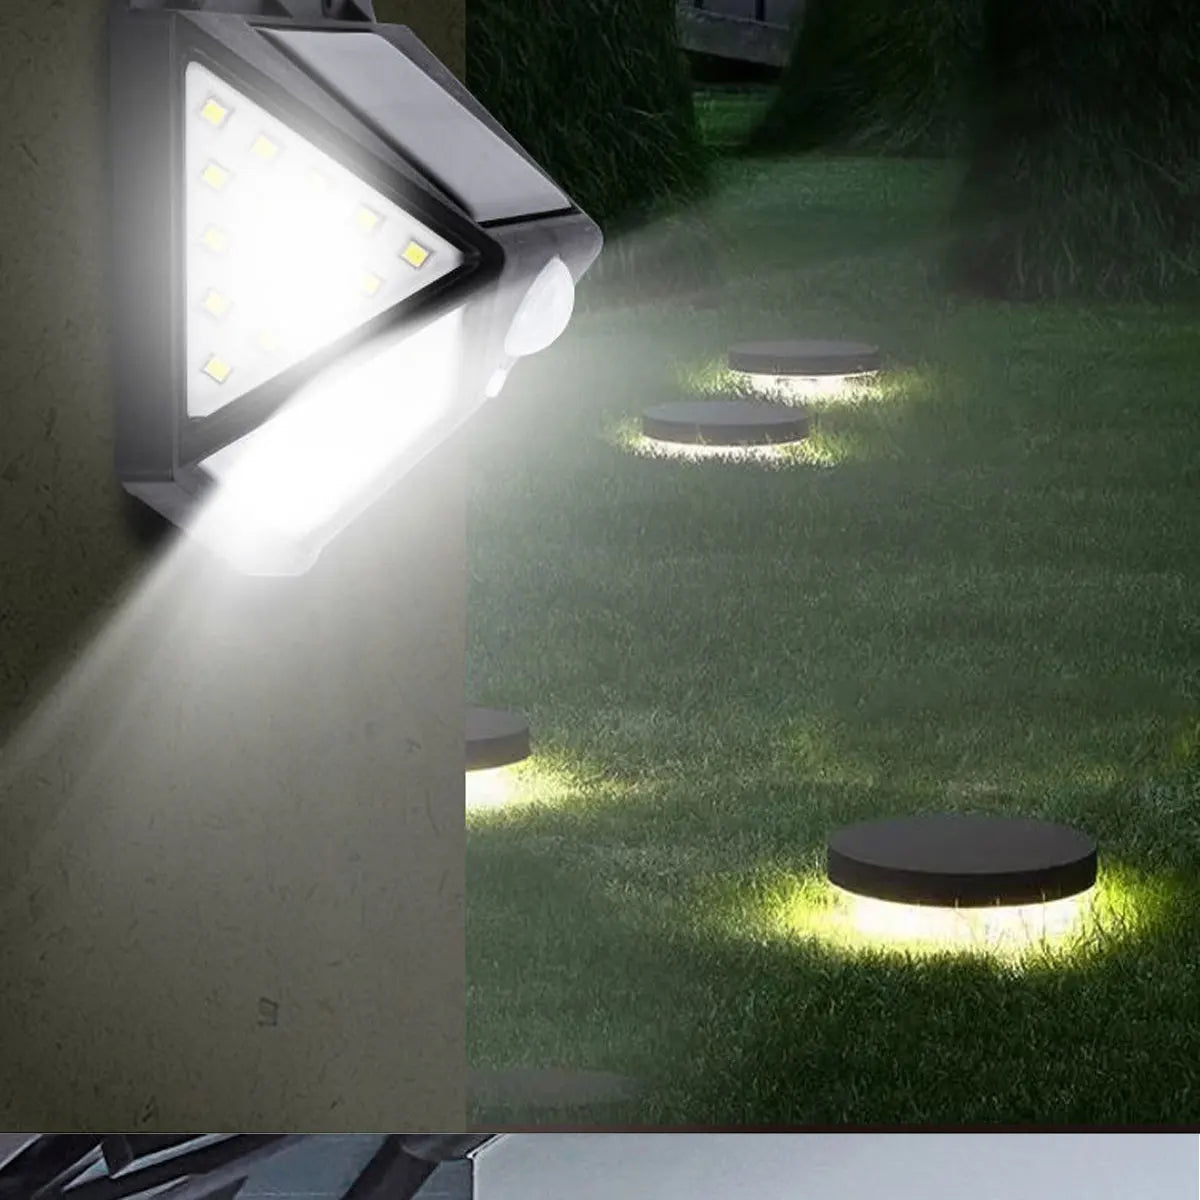 Solar-powered LED light with IP65 protection and 3-year warranty.